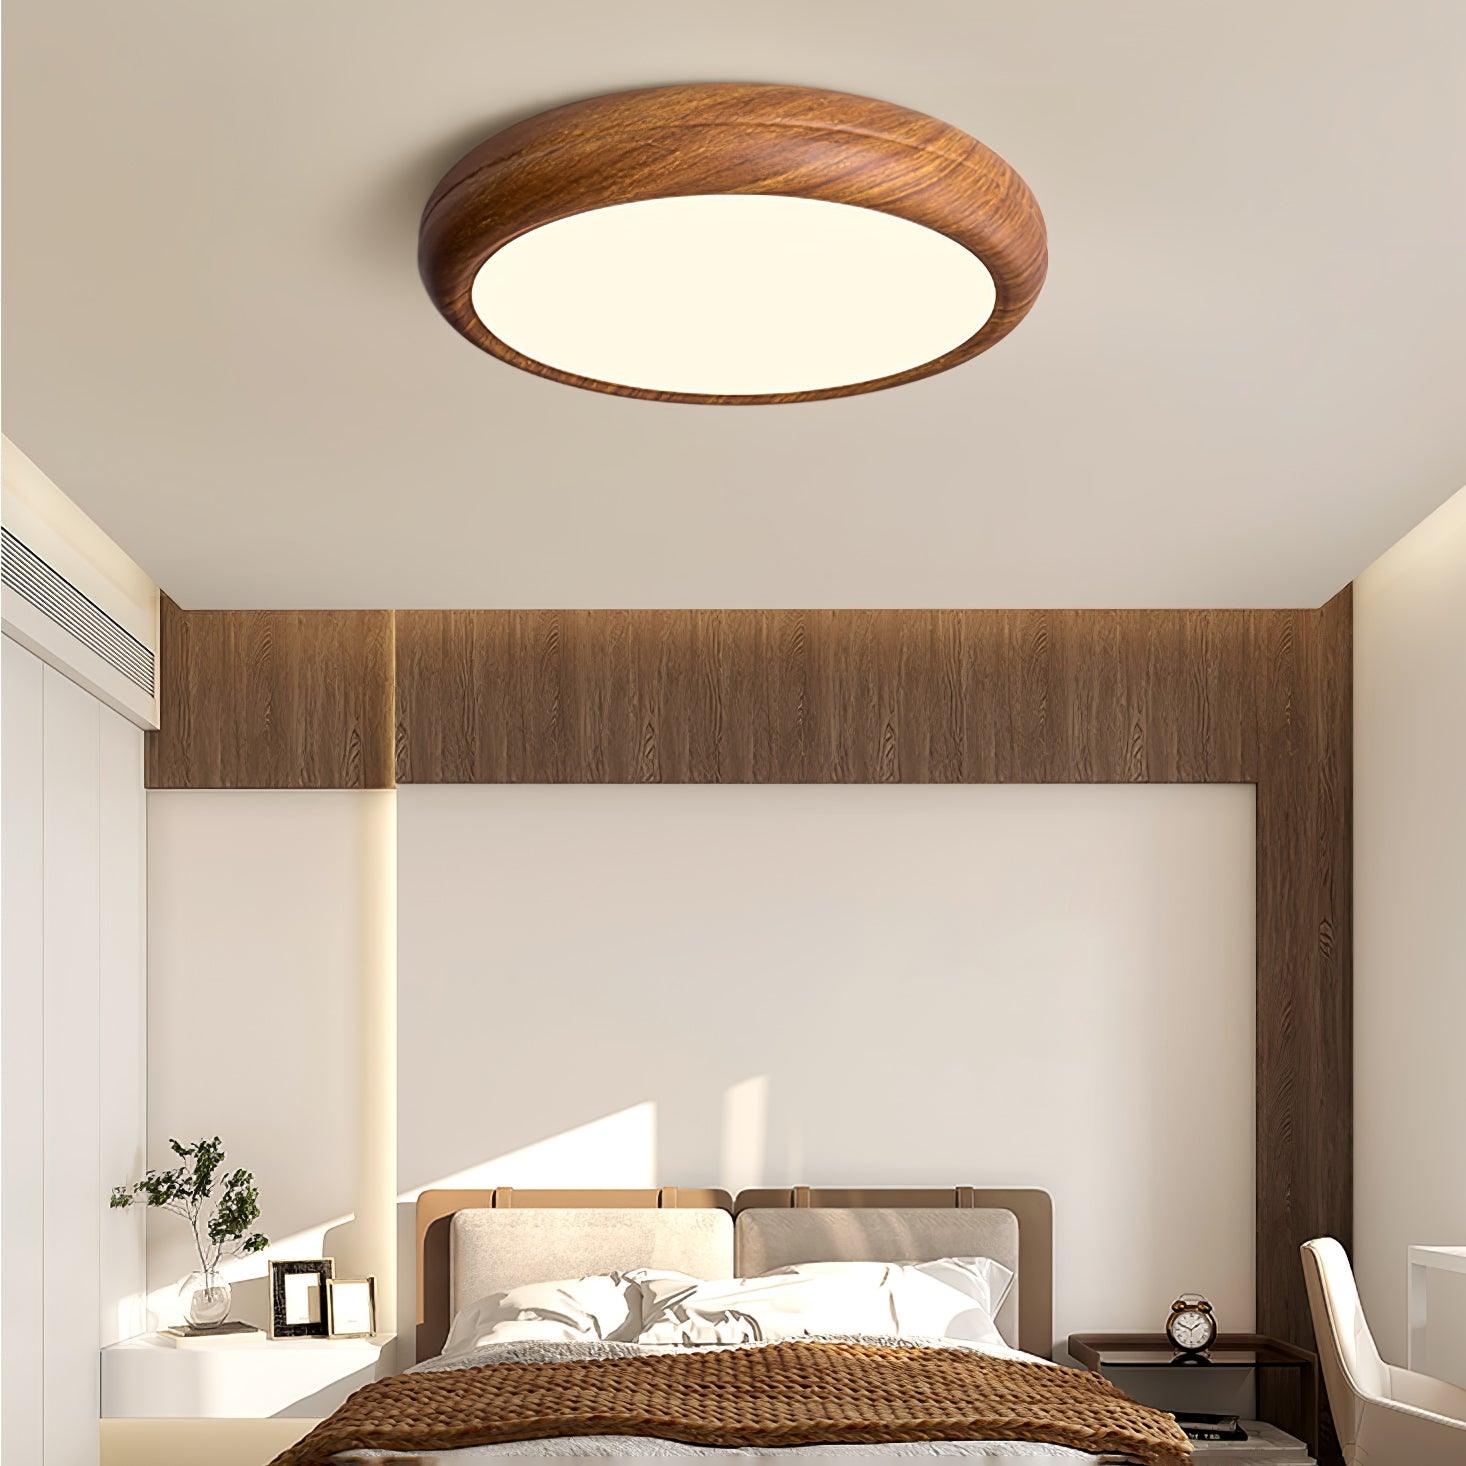 The Warm Glow of Innovation: 4 Stylish Wooden LED Ceiling Lights for Your Home